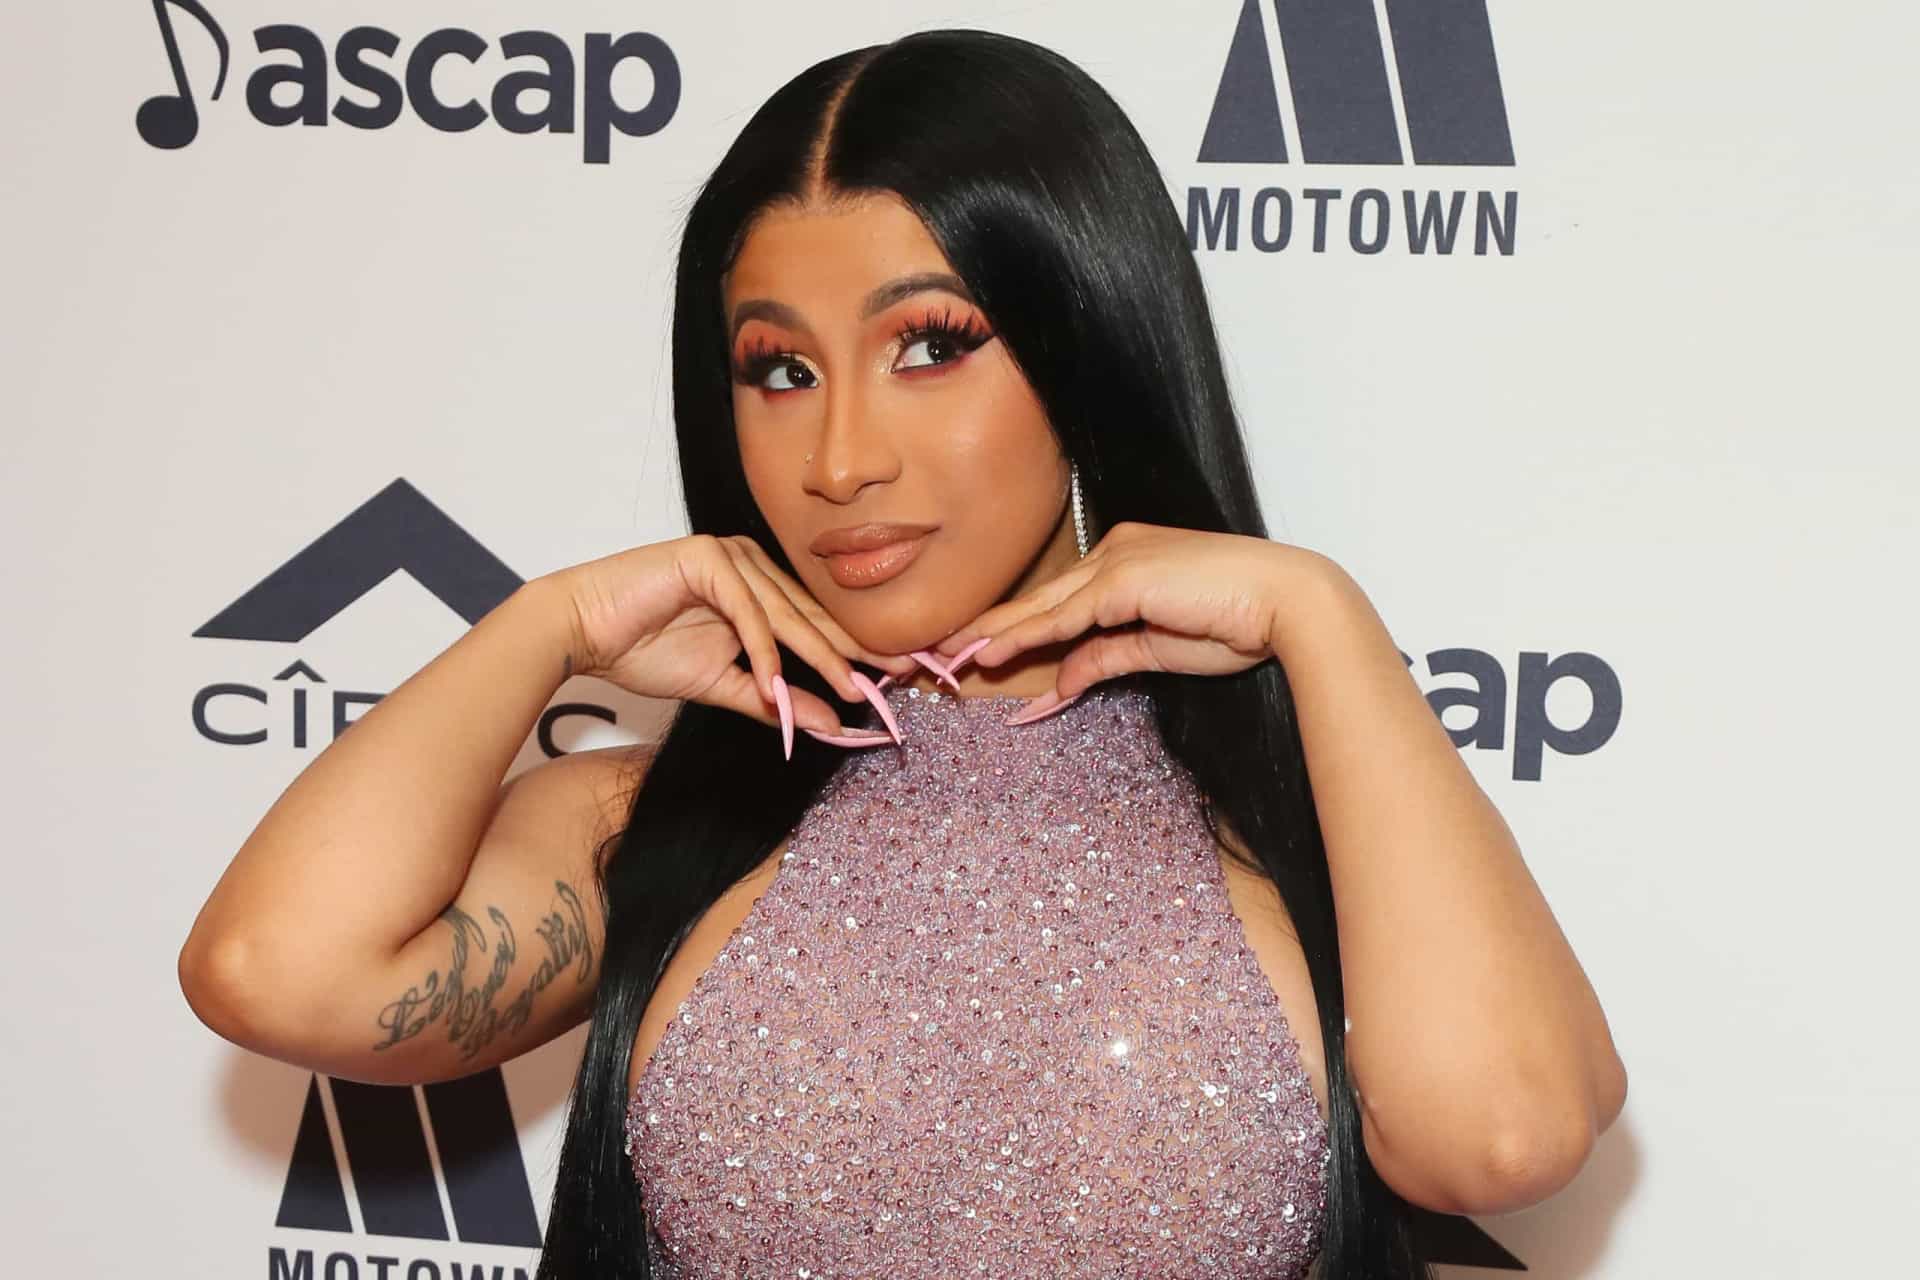 <p><span>The rapper has been open about her cosmetic surgeries. She had liposuction and a boob job after the birth of her daughter Kulture, canceling a few shows. She’s also told a </span><a href="https://www.gq.com/story/cardi-b-invasion-of-privacy-profile" rel="noopener"><span>story</span></a><span> of a nightmare cosmetic surgery, where she got butt implants in a basement for US$800.</span></p>